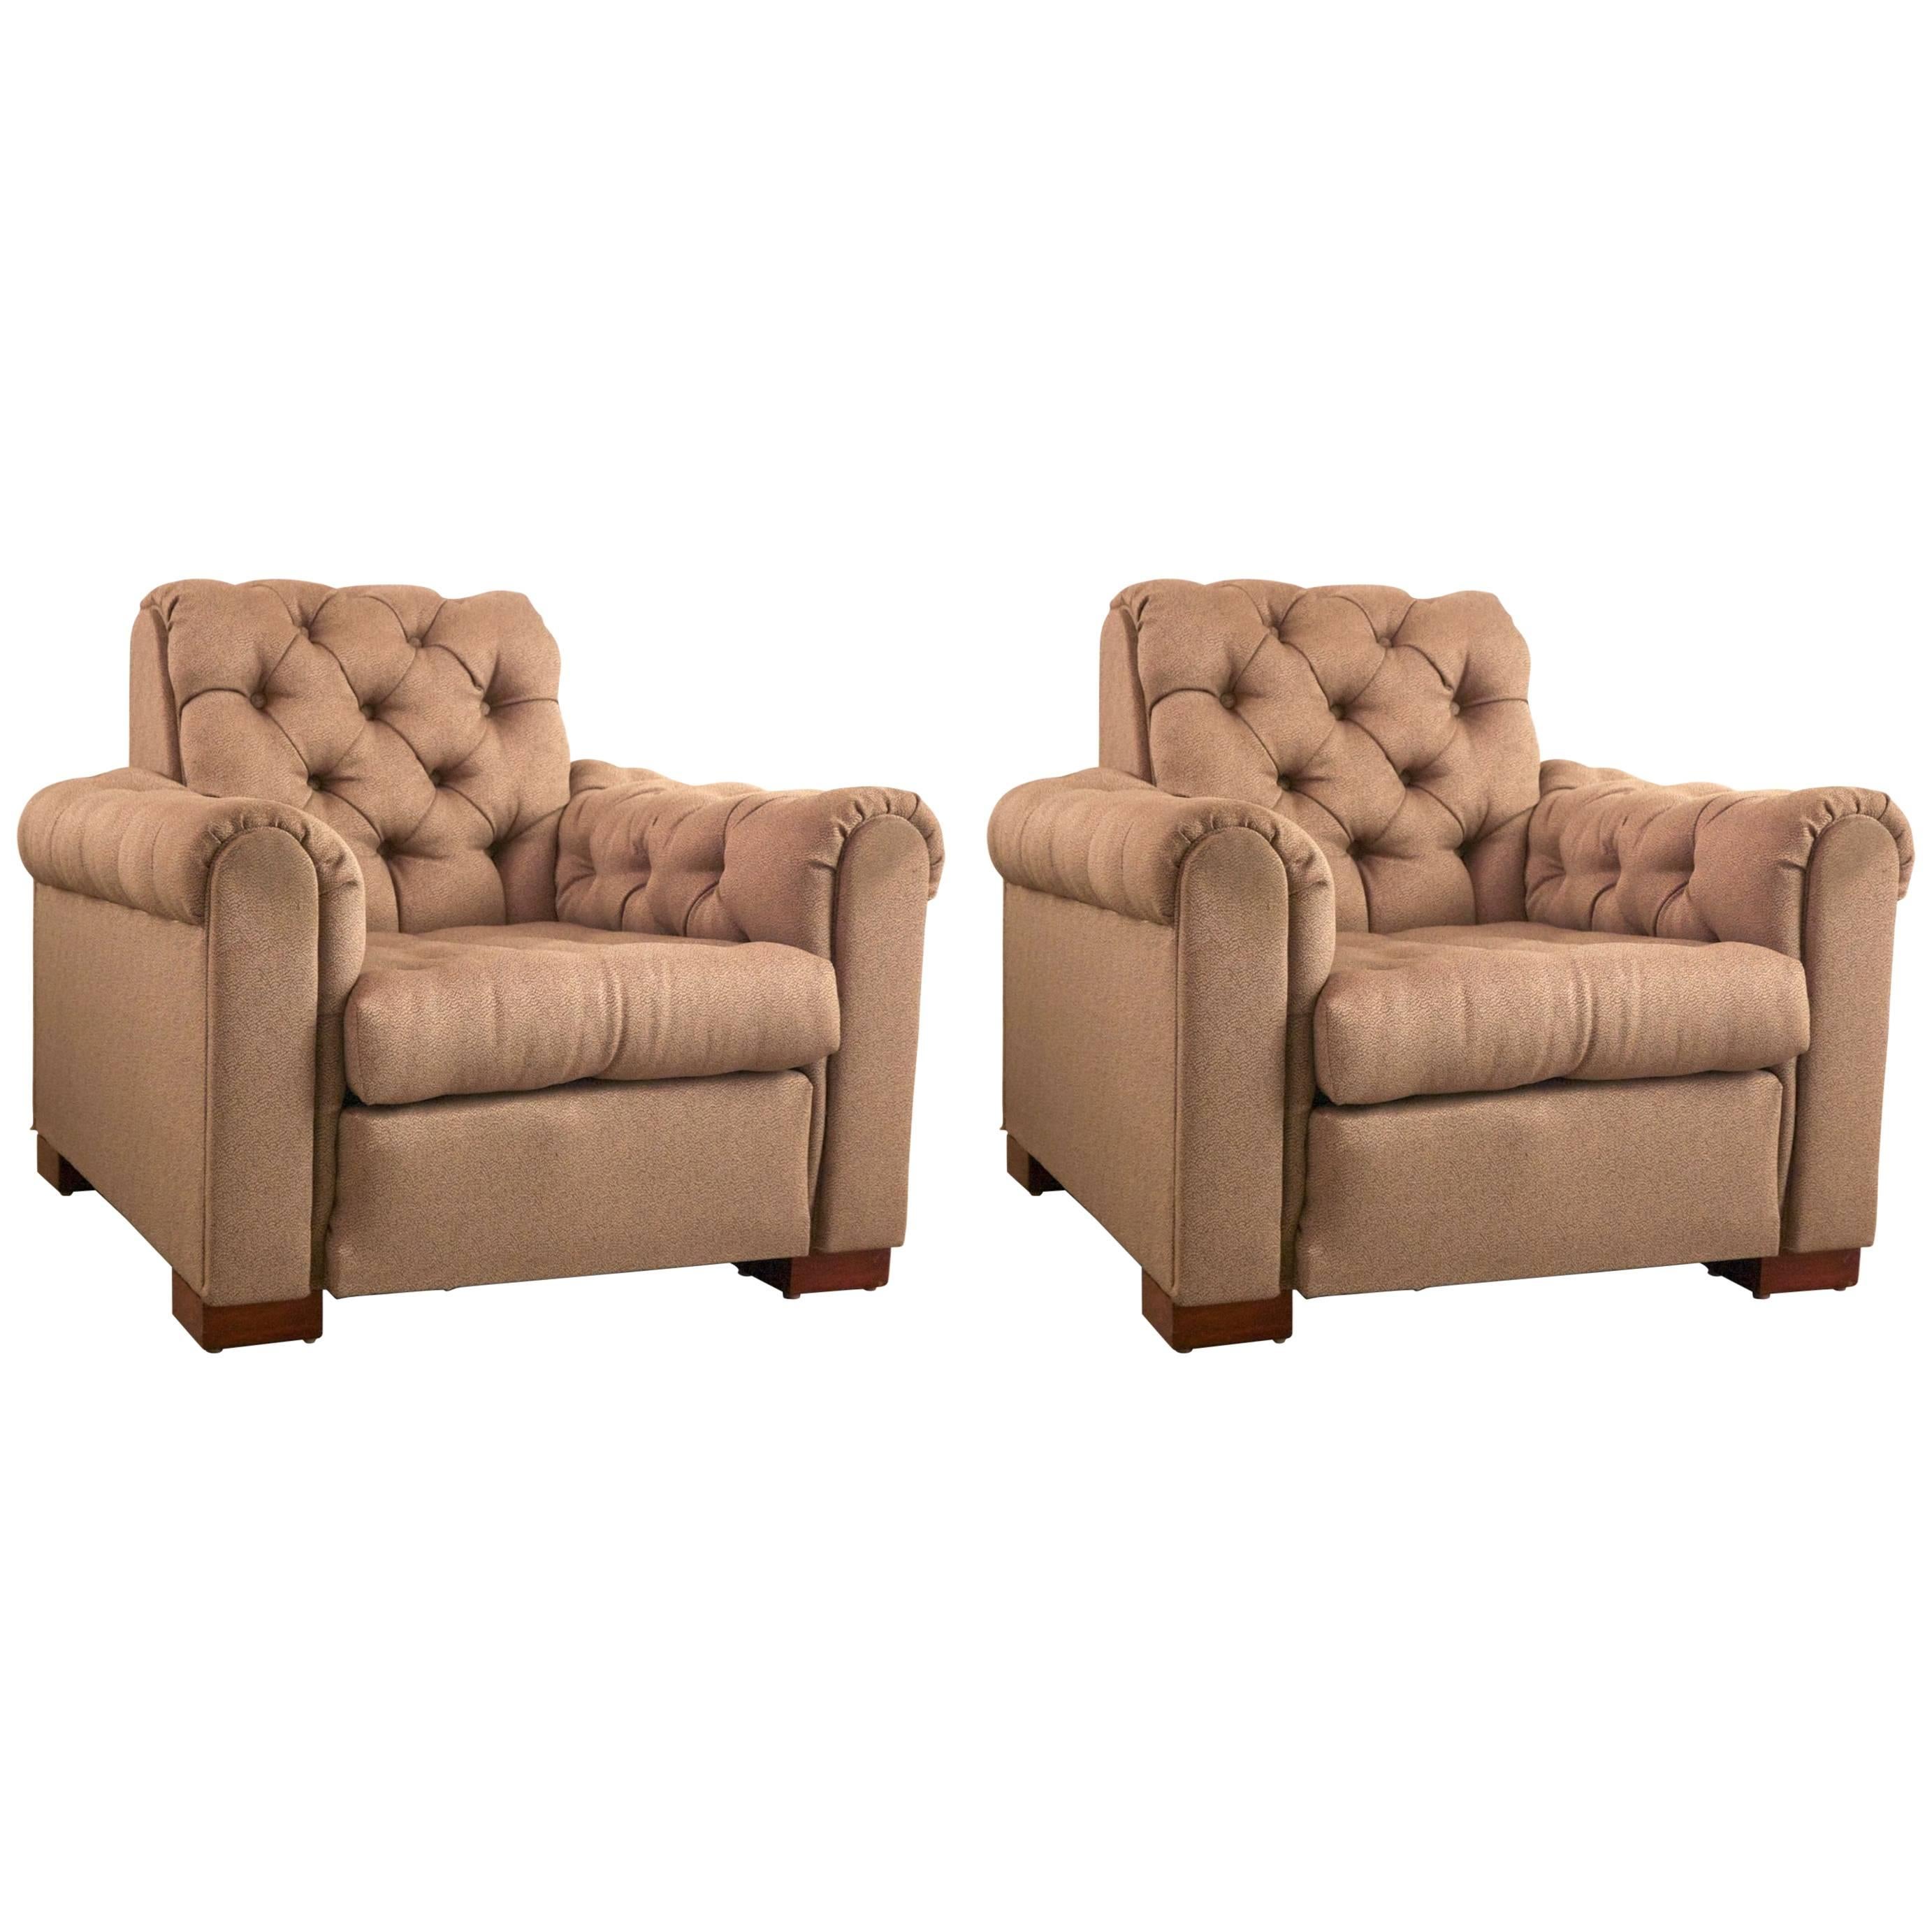 Leon & Maurice Jallot, Pair of Club Chairs